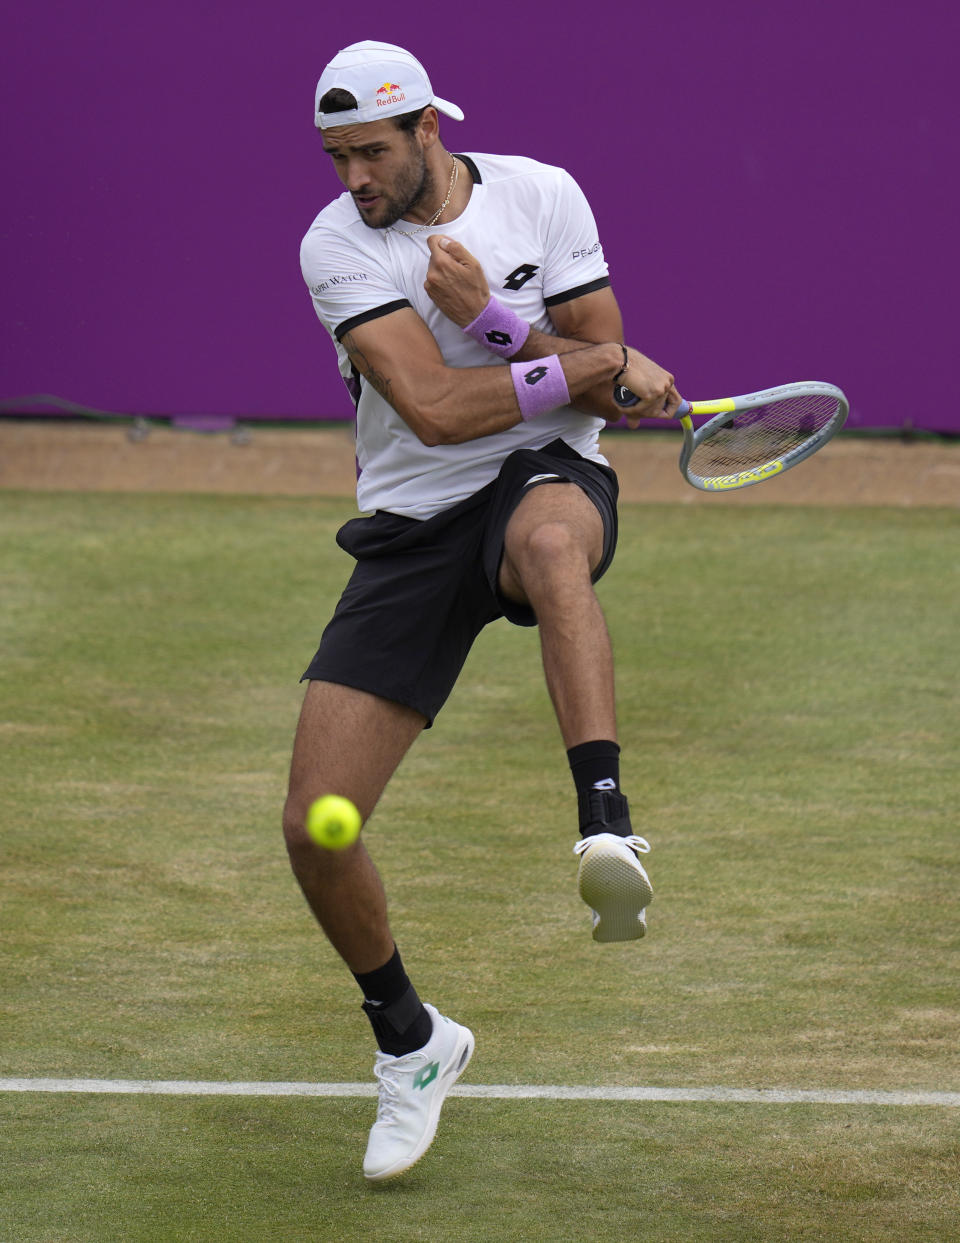 Matteo Berrettini of Italy plays a return to Andy Murray of Britain during their singles tennis match at the Queen's Club tournament in London, Thursday, June 17, 2021. (AP Photo/Kirsty Wigglesworth)